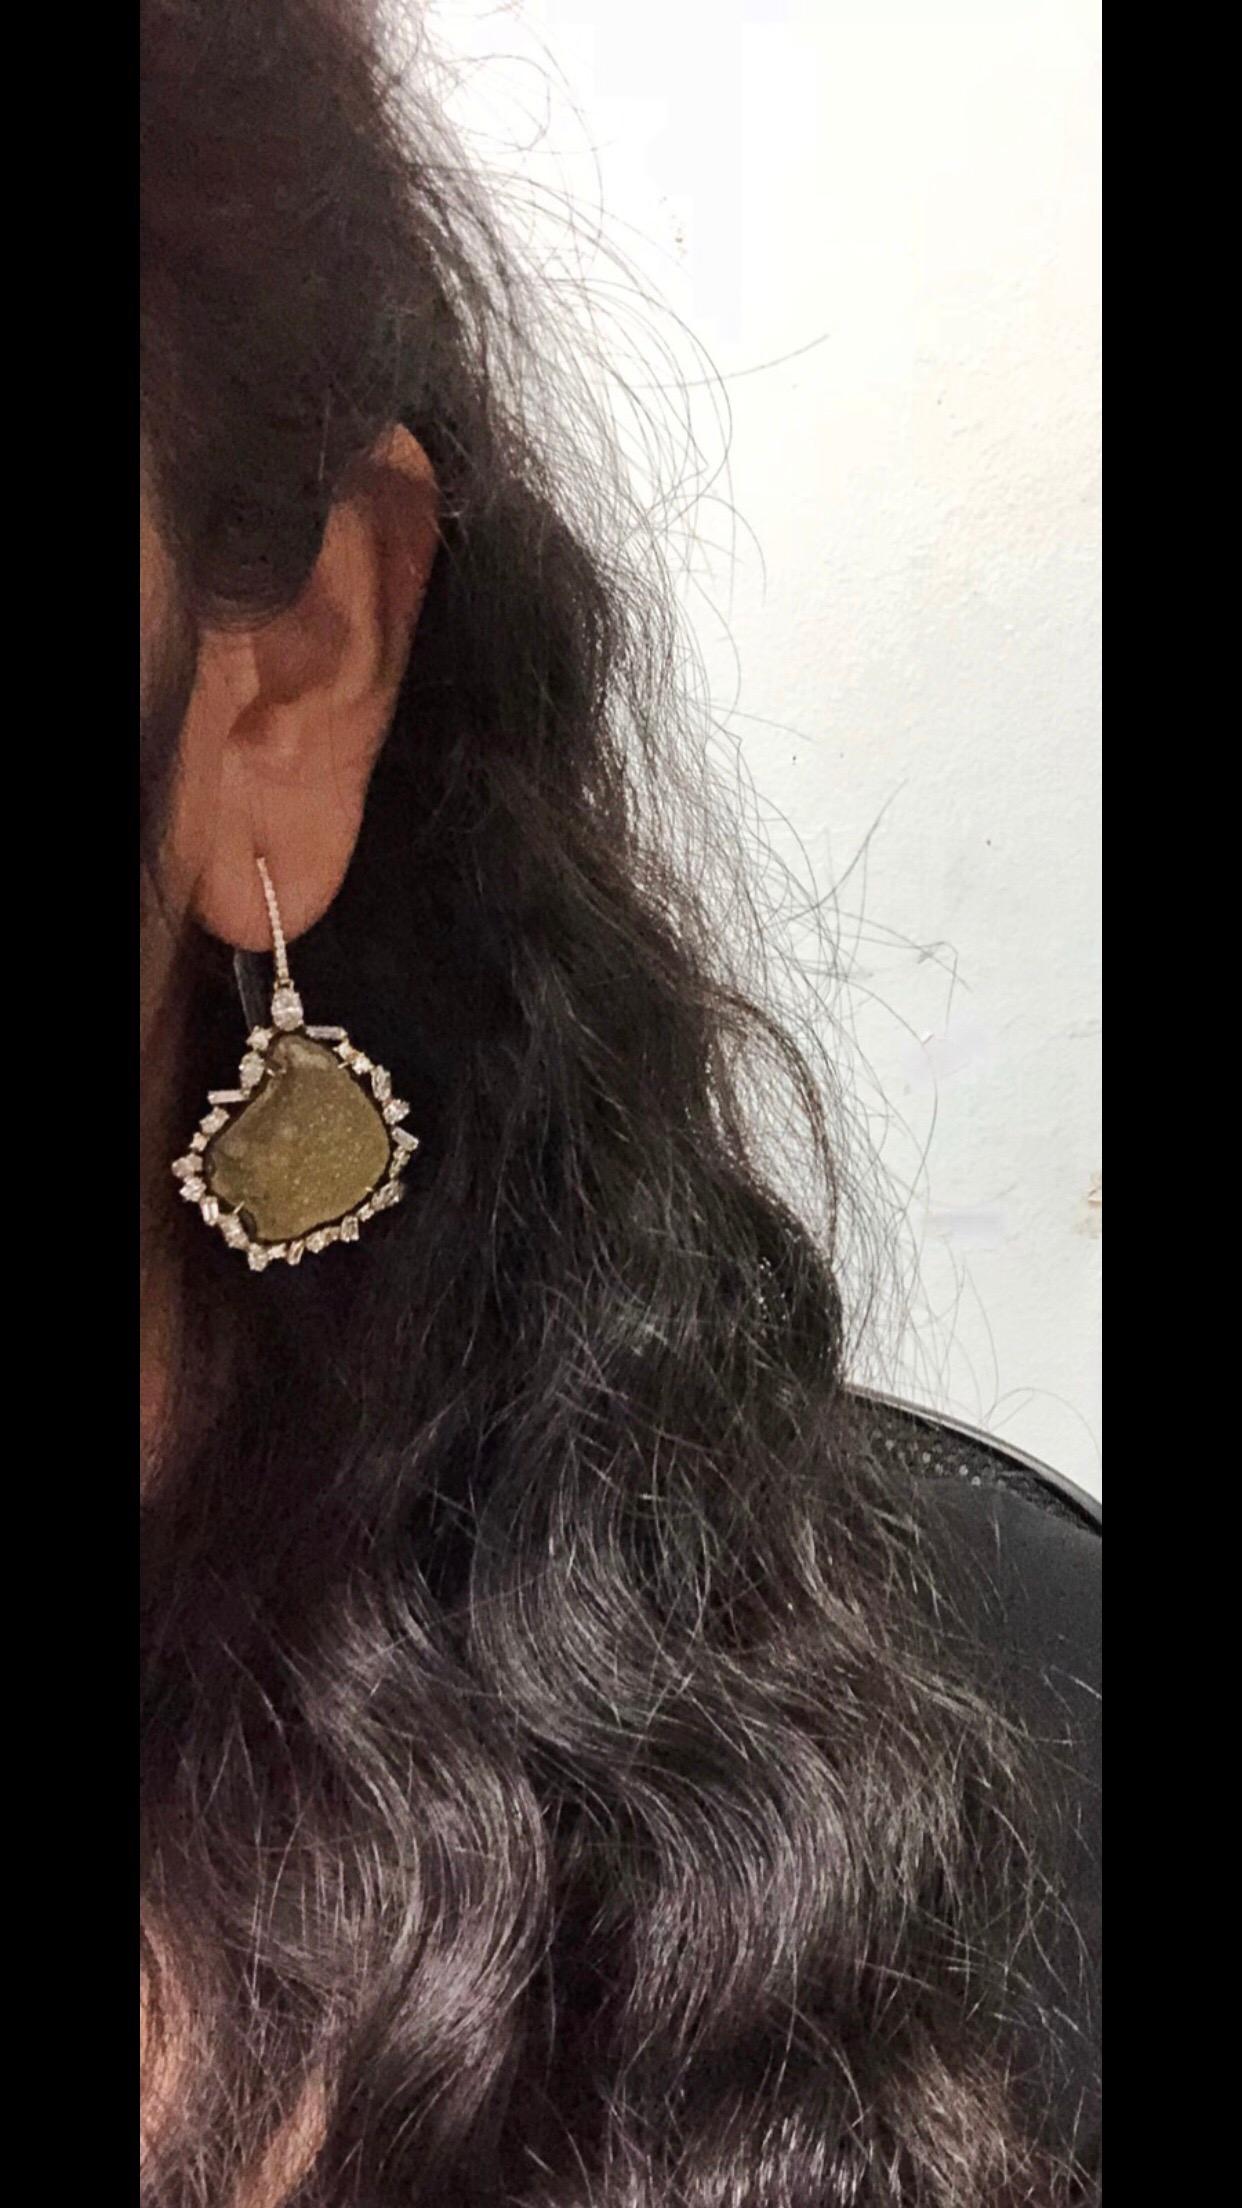 Large quartz geode dangle earrings in 18k yellow gold set with a free form halo of various shaped diamonds and round diamonds in the bell. The earrings have a total of approximately 4.15 carat total weight in diamonds. Larger diamonds in the halo